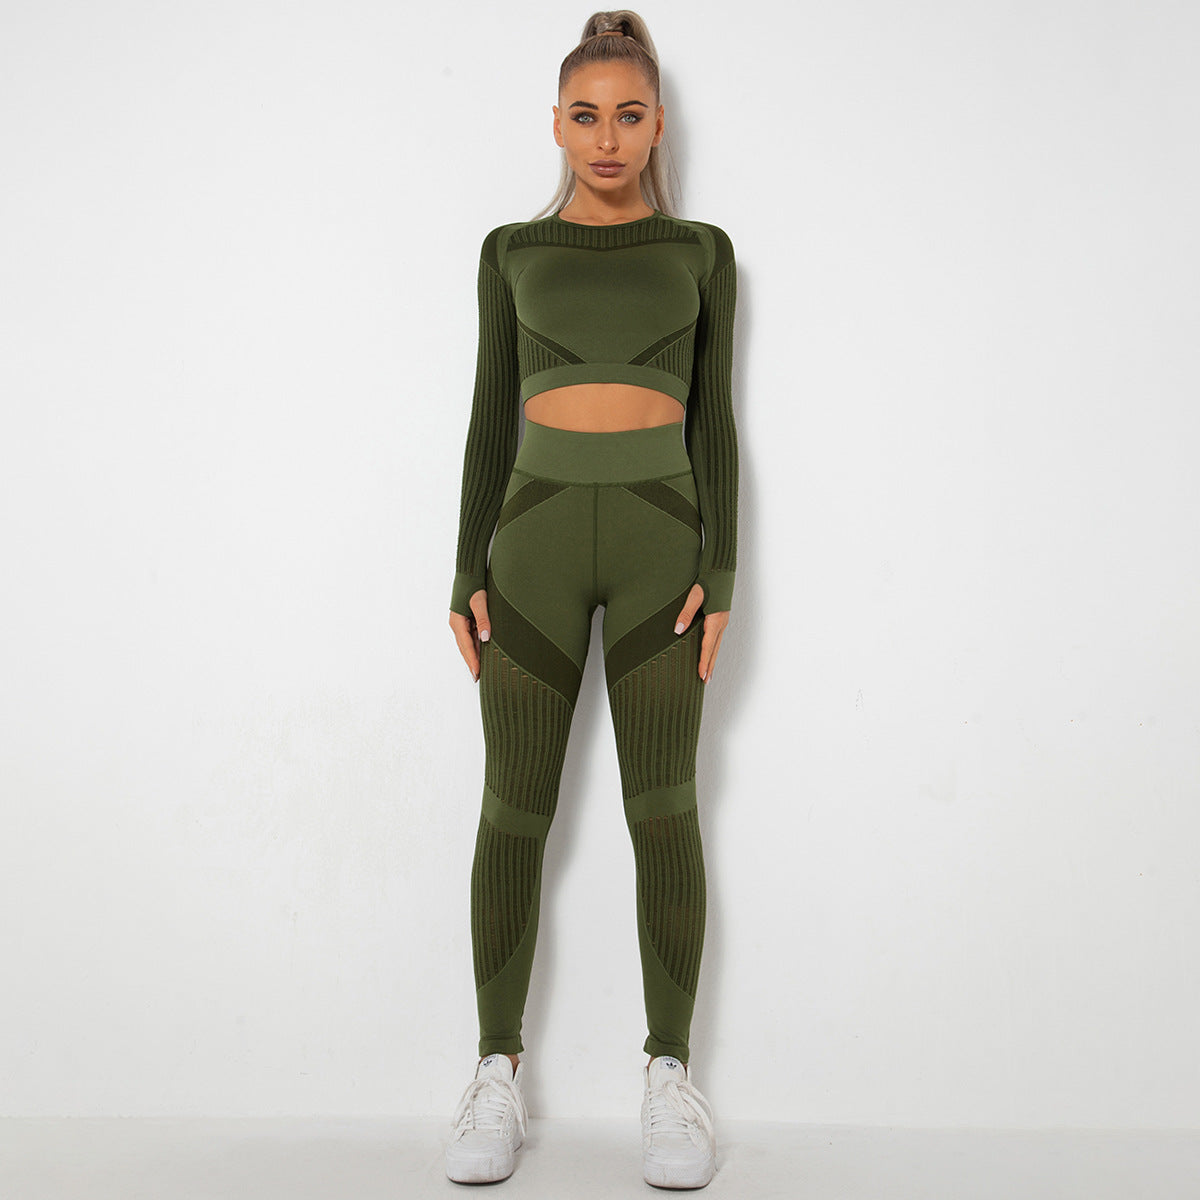 Sexy Hollow Out Long Sleeves Tops and Leggings Sets for Yoga Sporting-Activewear-Army Green-XS-Free Shipping Leatheretro